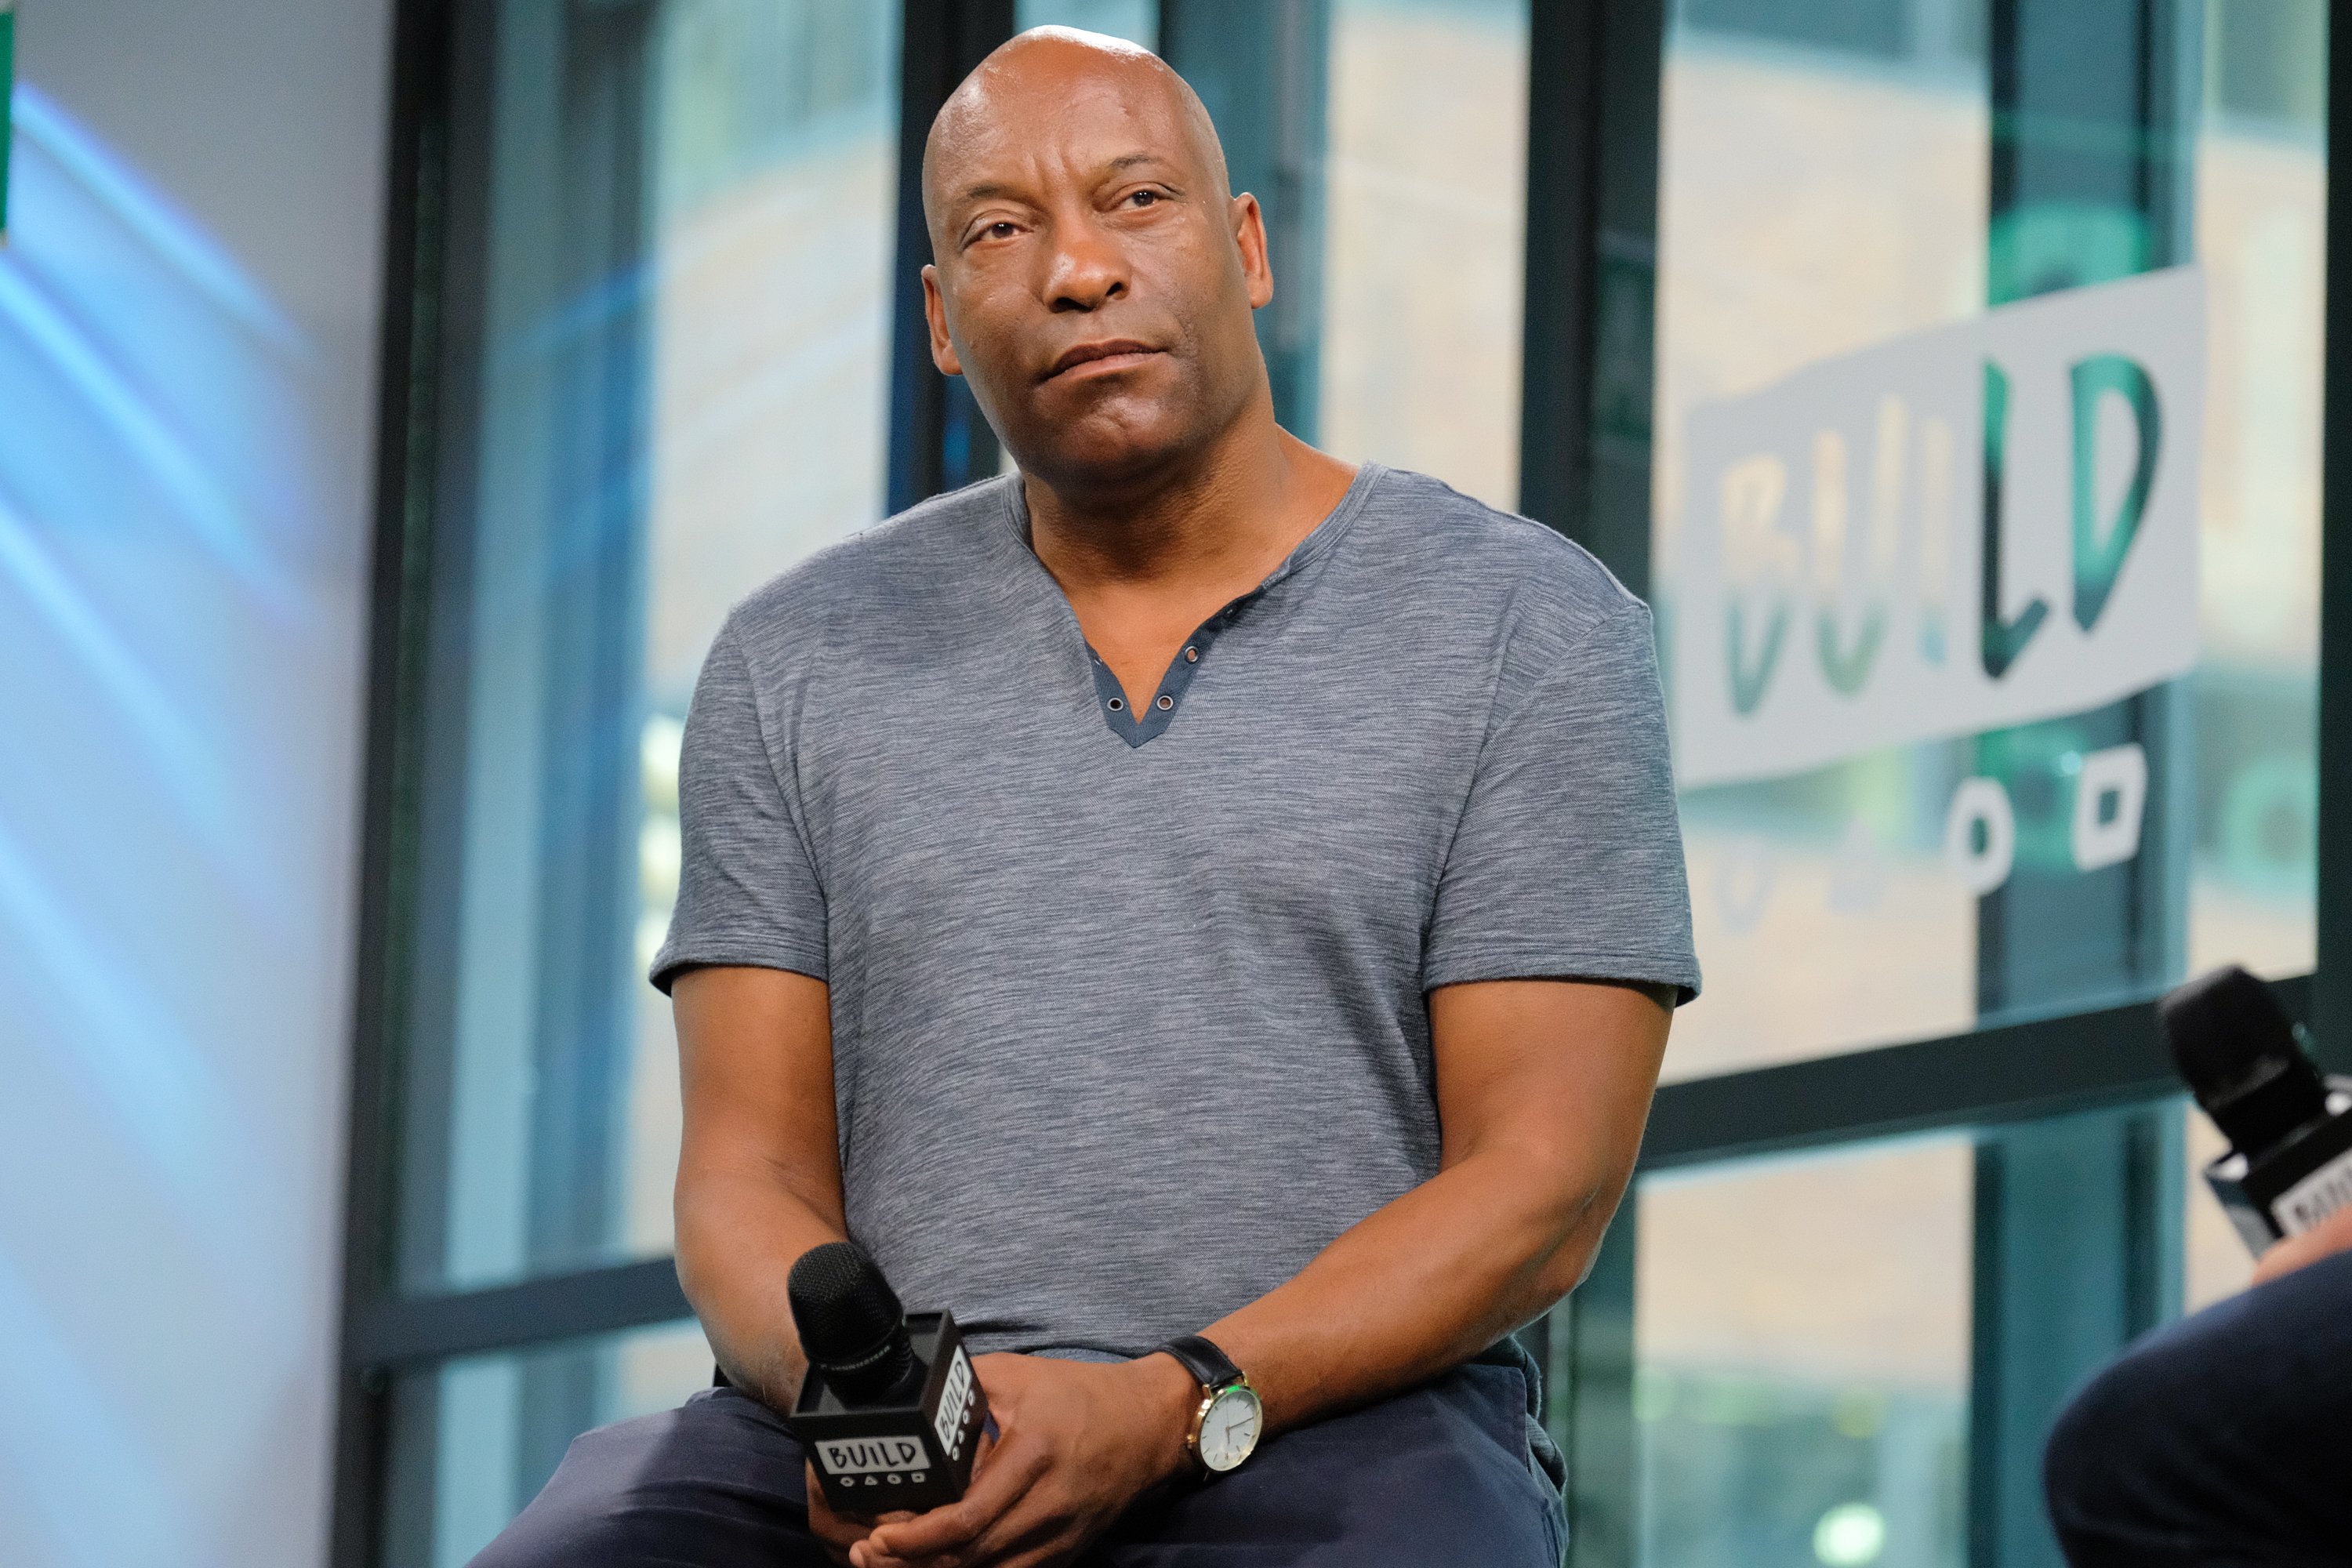  John Singleton discusses the new TV series "Snowfall" at Build Studio on July 20, 2017. | Photo:  GettyImages